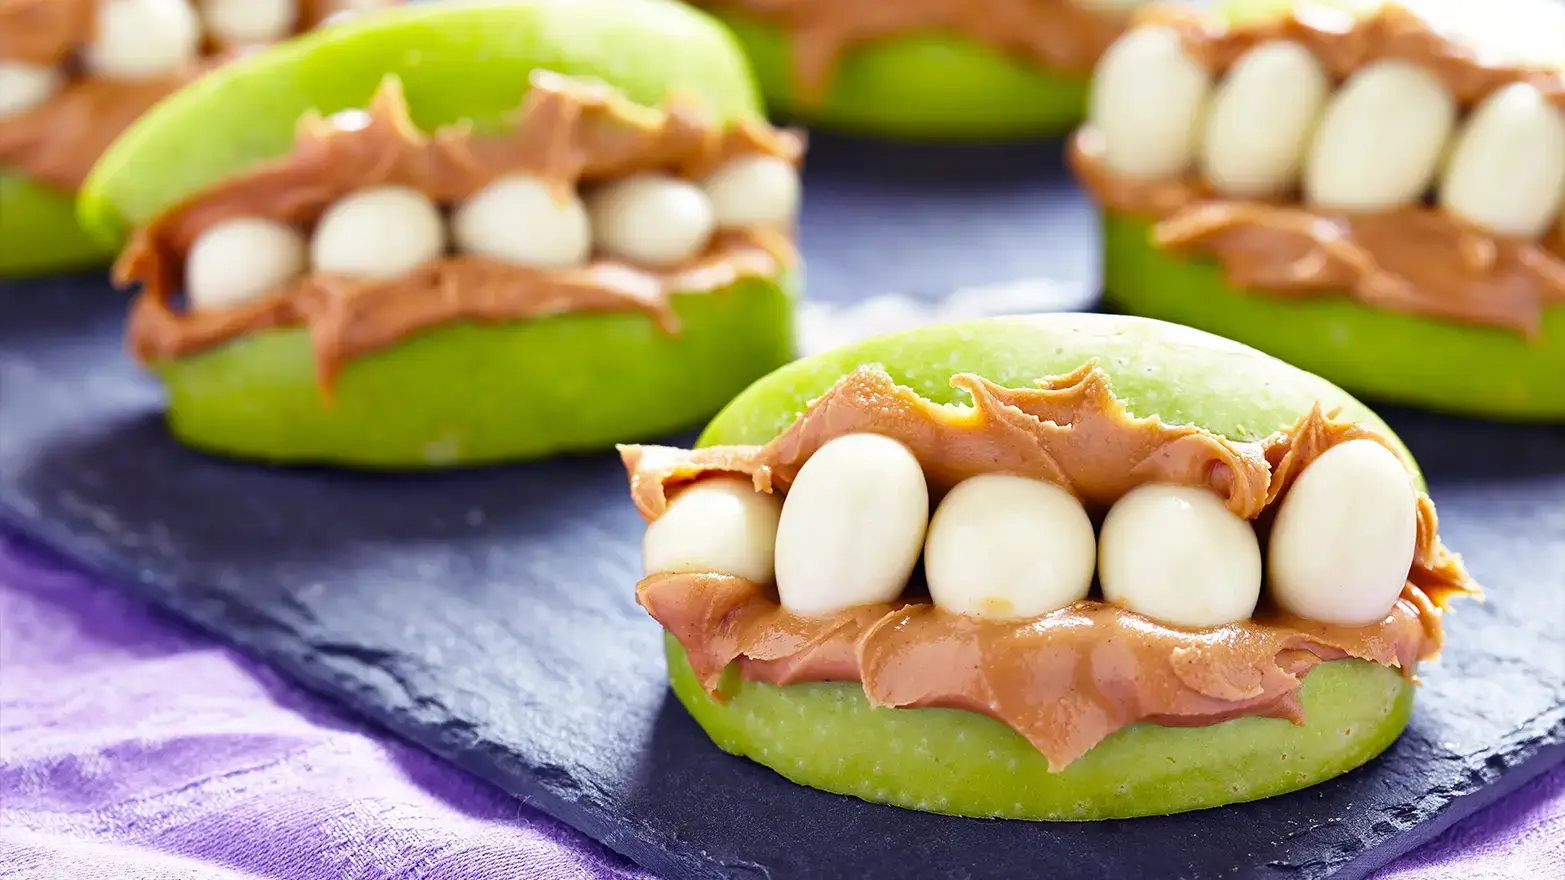 Apple slices with peanut butter and yogurt covered almonds that resemble teeth